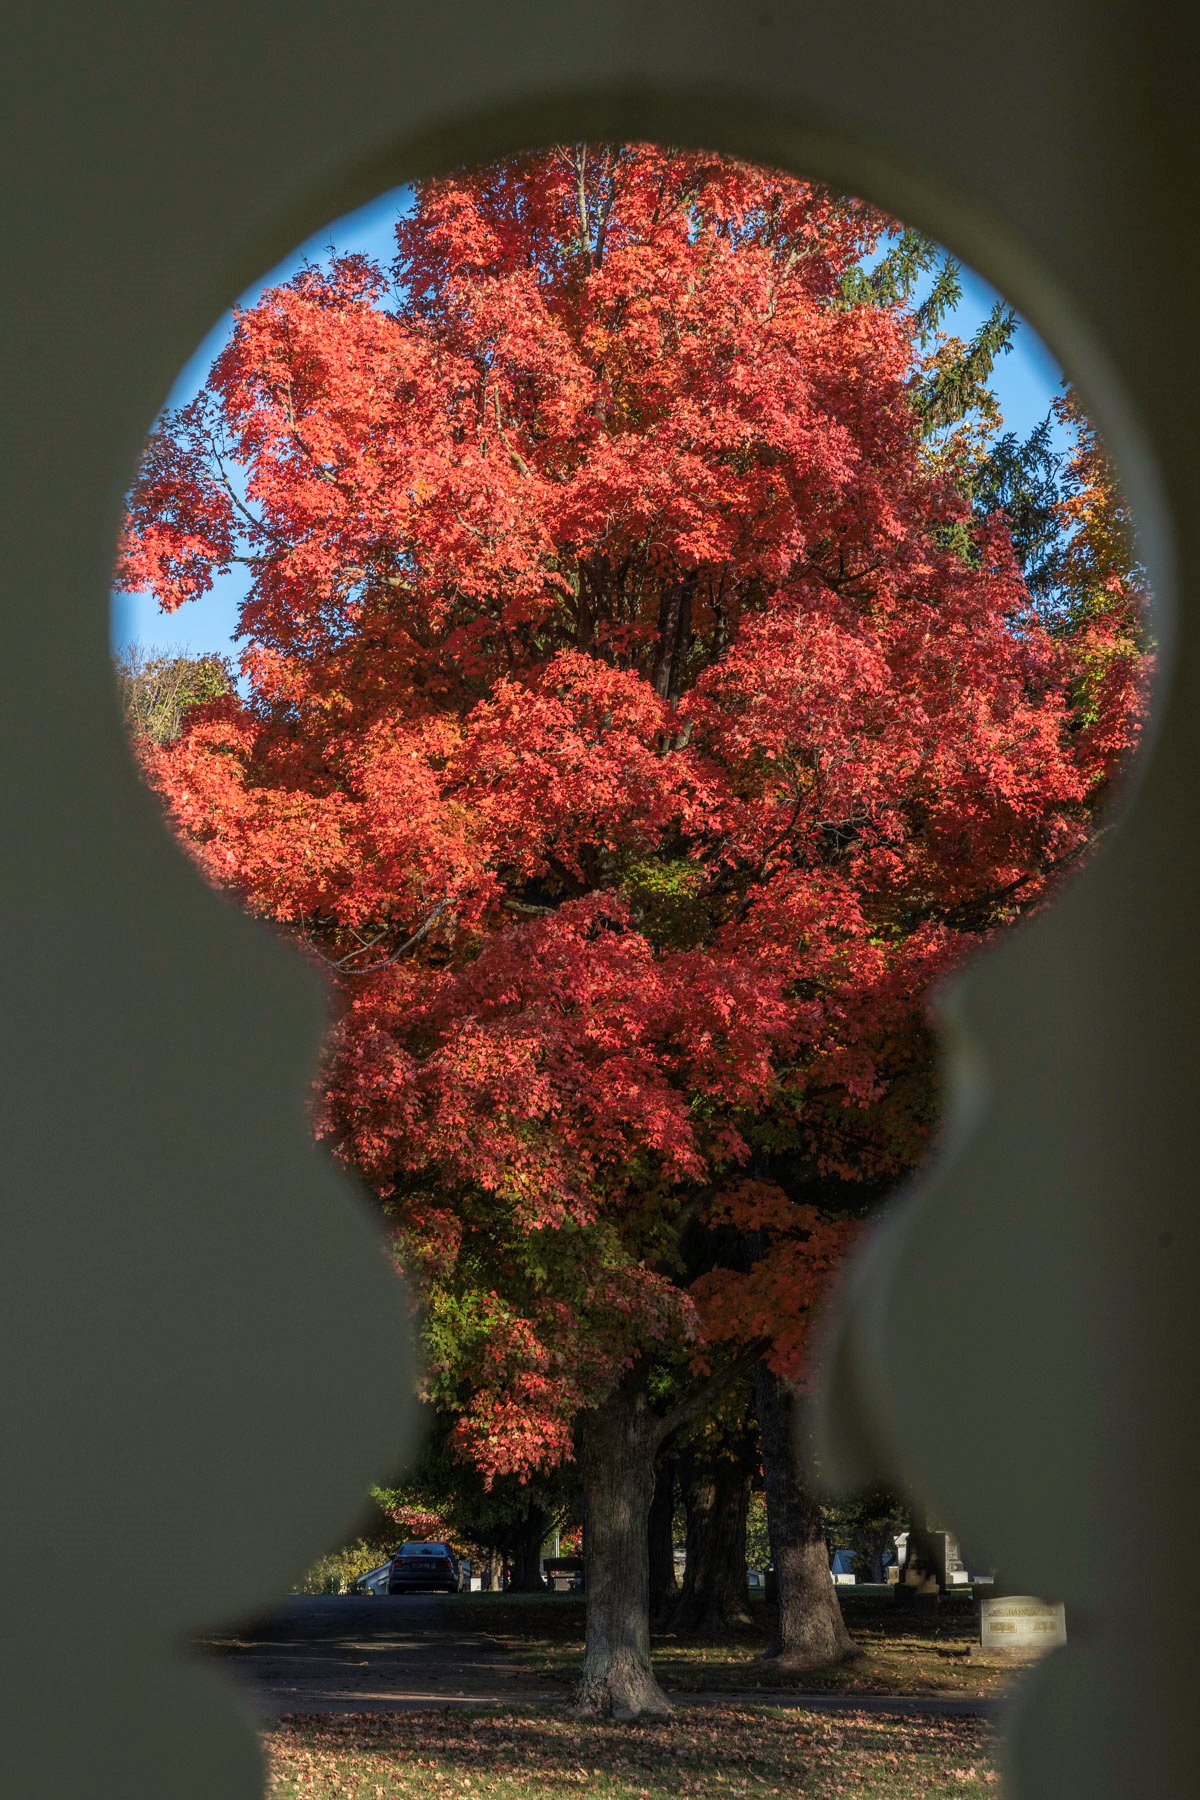 A maple tree with orange leaves, viewed through a keyhole in the park's gazebo.